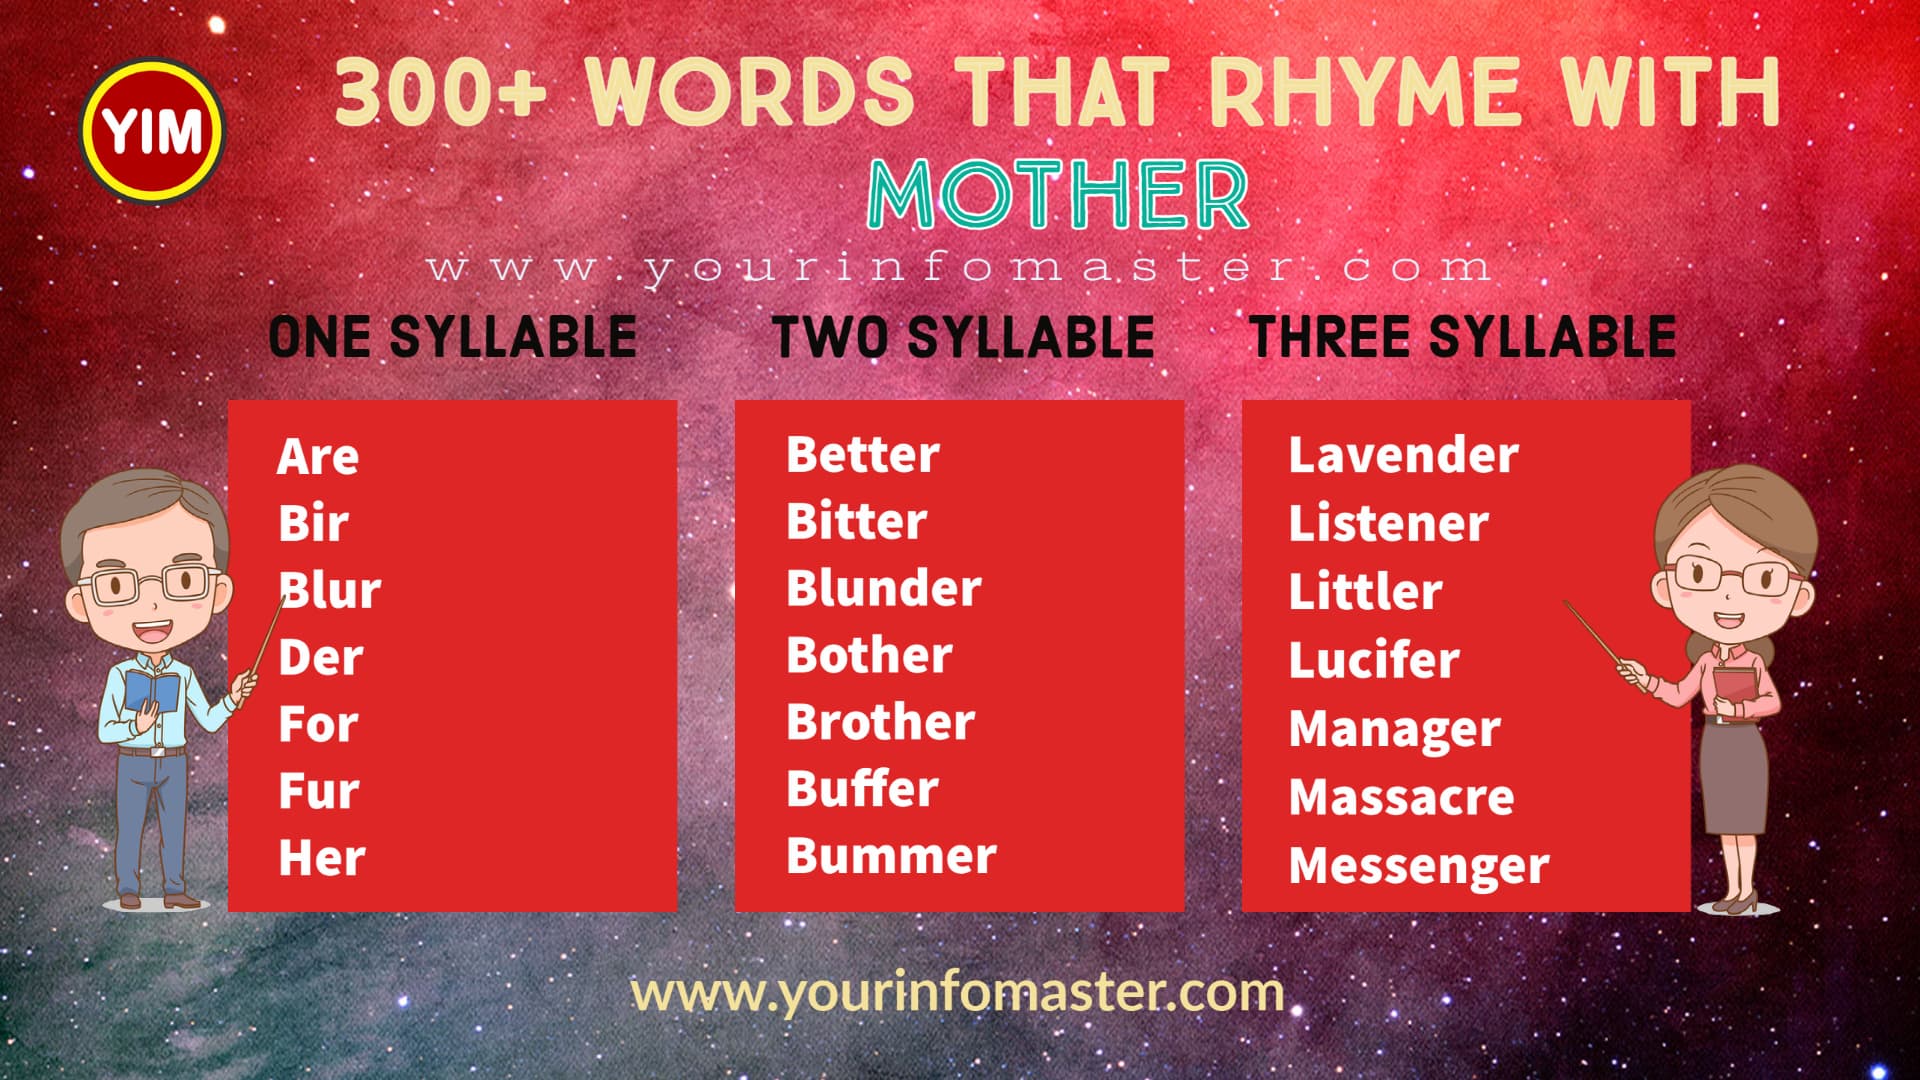 100 rhyming words, 1000 rhyming words, 200+ Interesting Words, 200+ Useful Words, 300 rhyming words list, 50 rhyming words list, 500 rhyming words, all words that rhyme with Mother, Another word for Mother, how to teach rhyming words, Interesting Words that Rhyme in English, Mother rhyme, Mother rhyme examples, Mother Rhyming words, Printable Infographics, Printable Worksheets, rhymes English words, rhymes with Mother infographics, rhyming pairs, Rhyming Words, Rhyming Words for Kids, rhyming words for Mother, Rhyming Words List, Things that rhyme with Mother, what are rhyming words, what rhymes with Mother, words rhyming with Mother, Words that Rhyme, Words That Rhyme with Mother